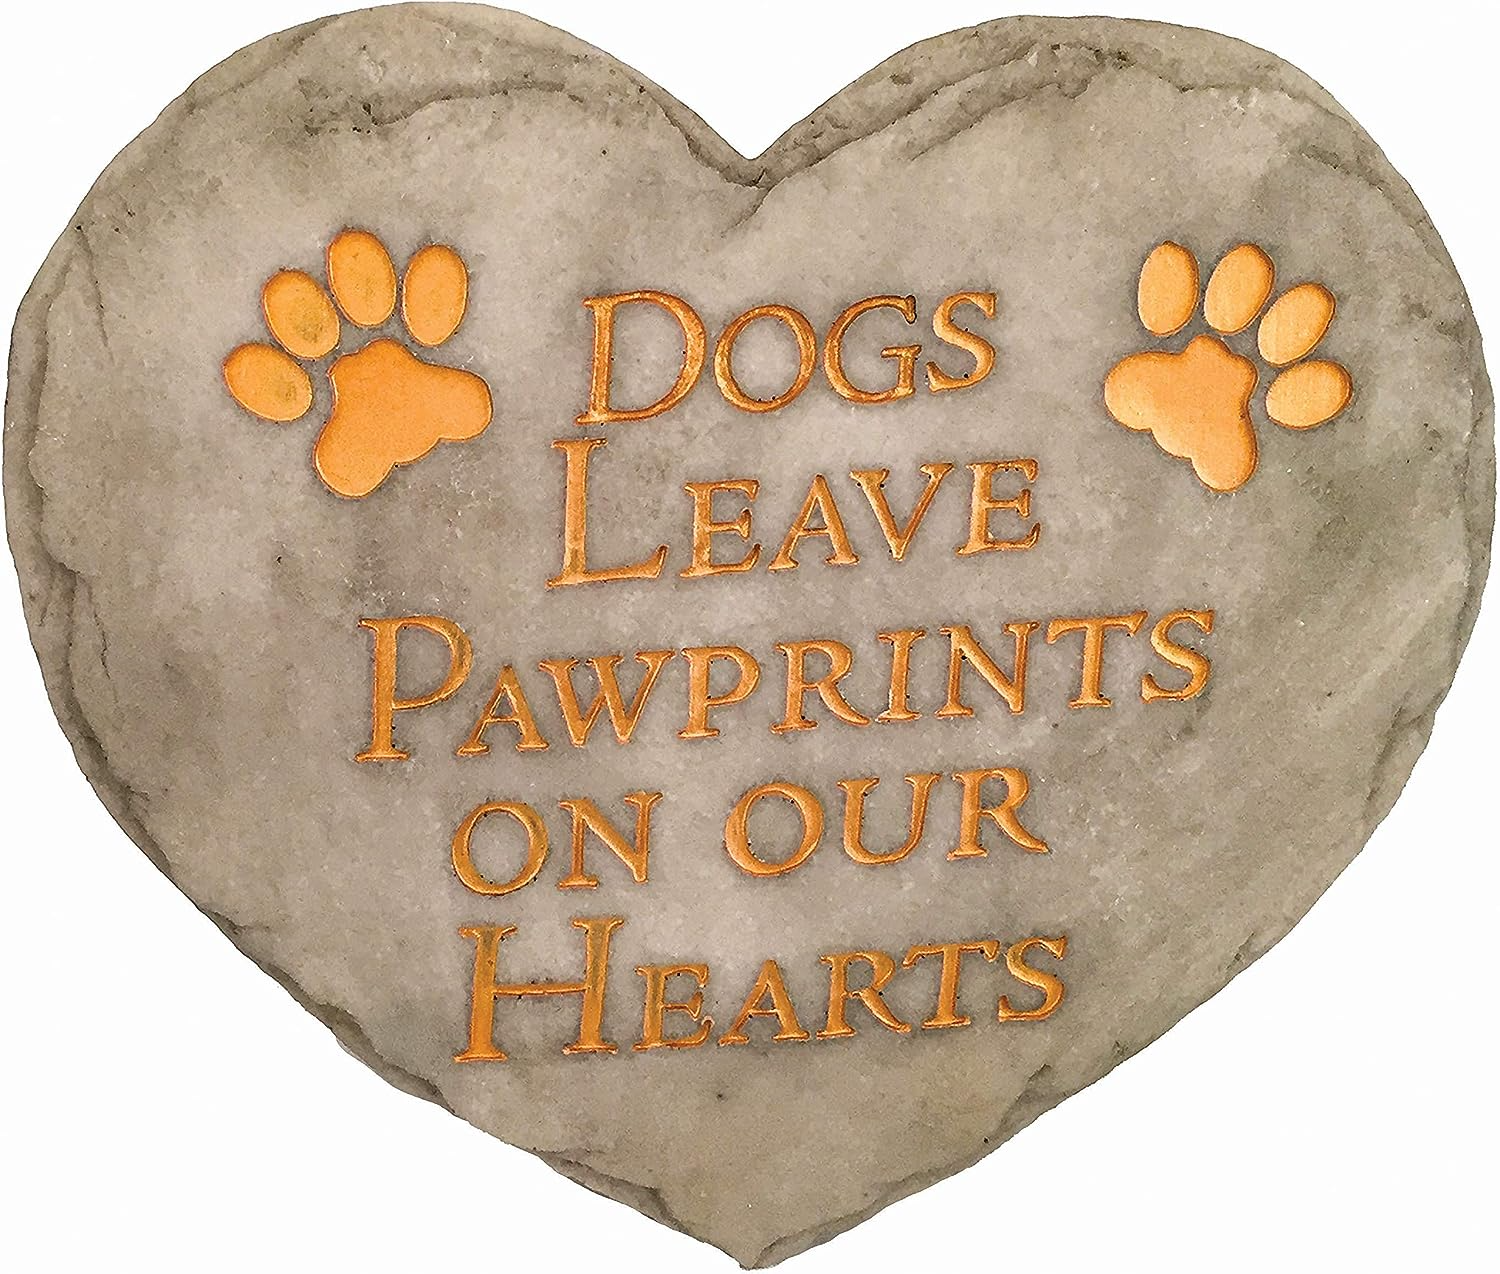 Dogs Leave Pawprints On Our Hearts - Stepping Stone - Mellow Monkey